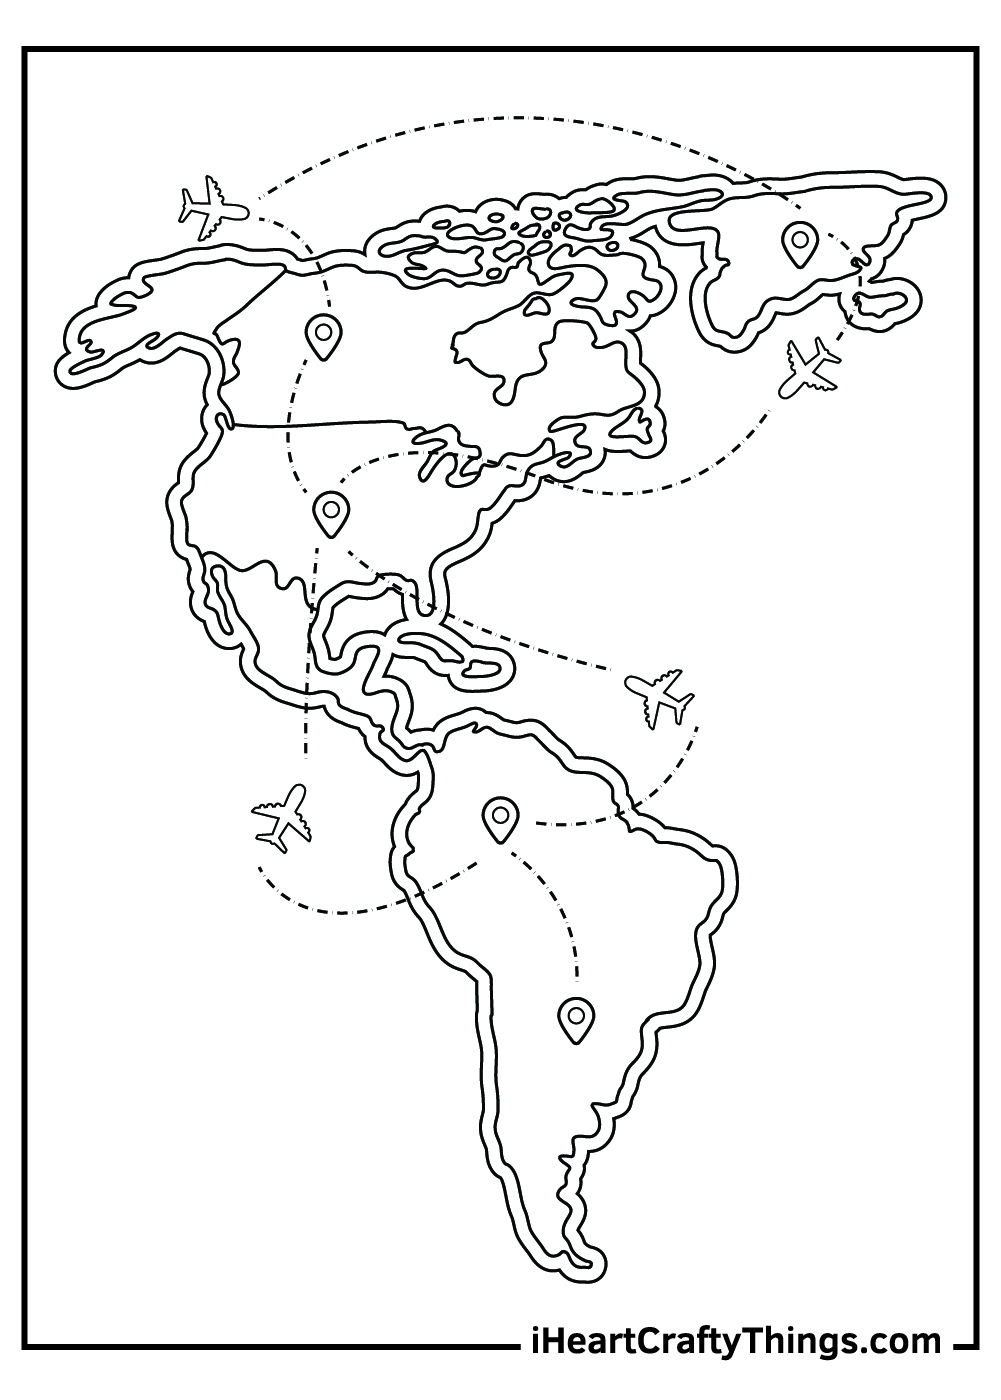 World map coloring pages free printables